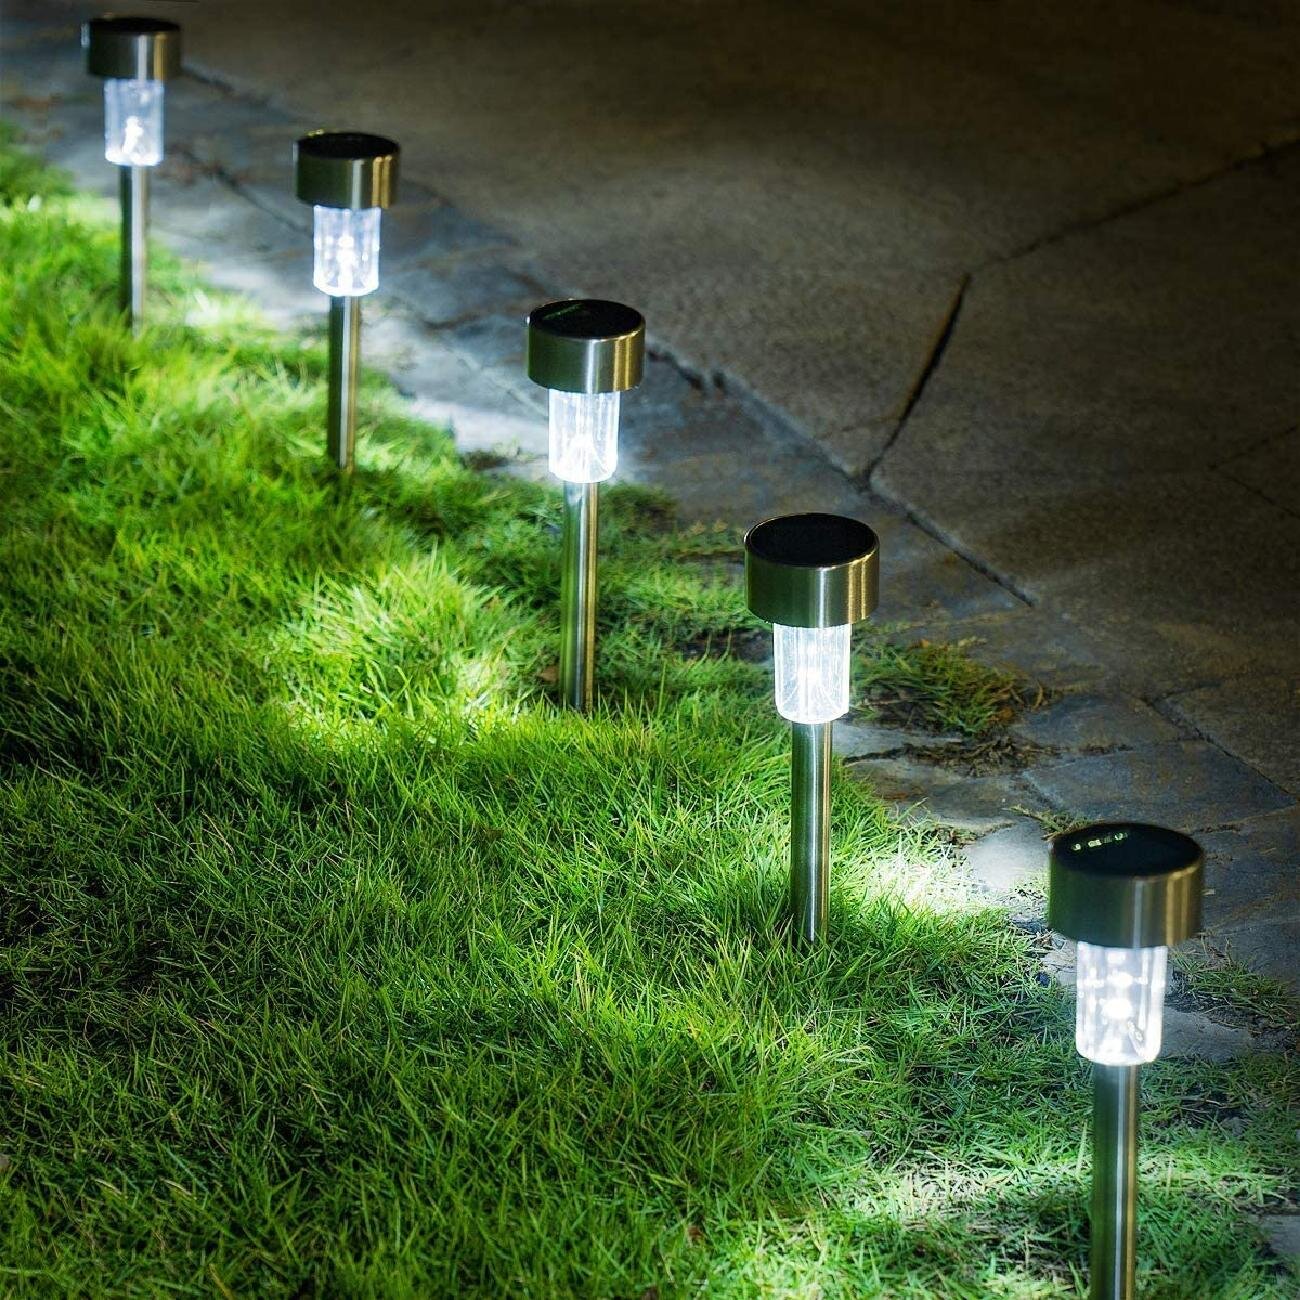 Outdoor Solar Lamp LED Round Wall Light Atmosphere Lights for Garden Park Lawn